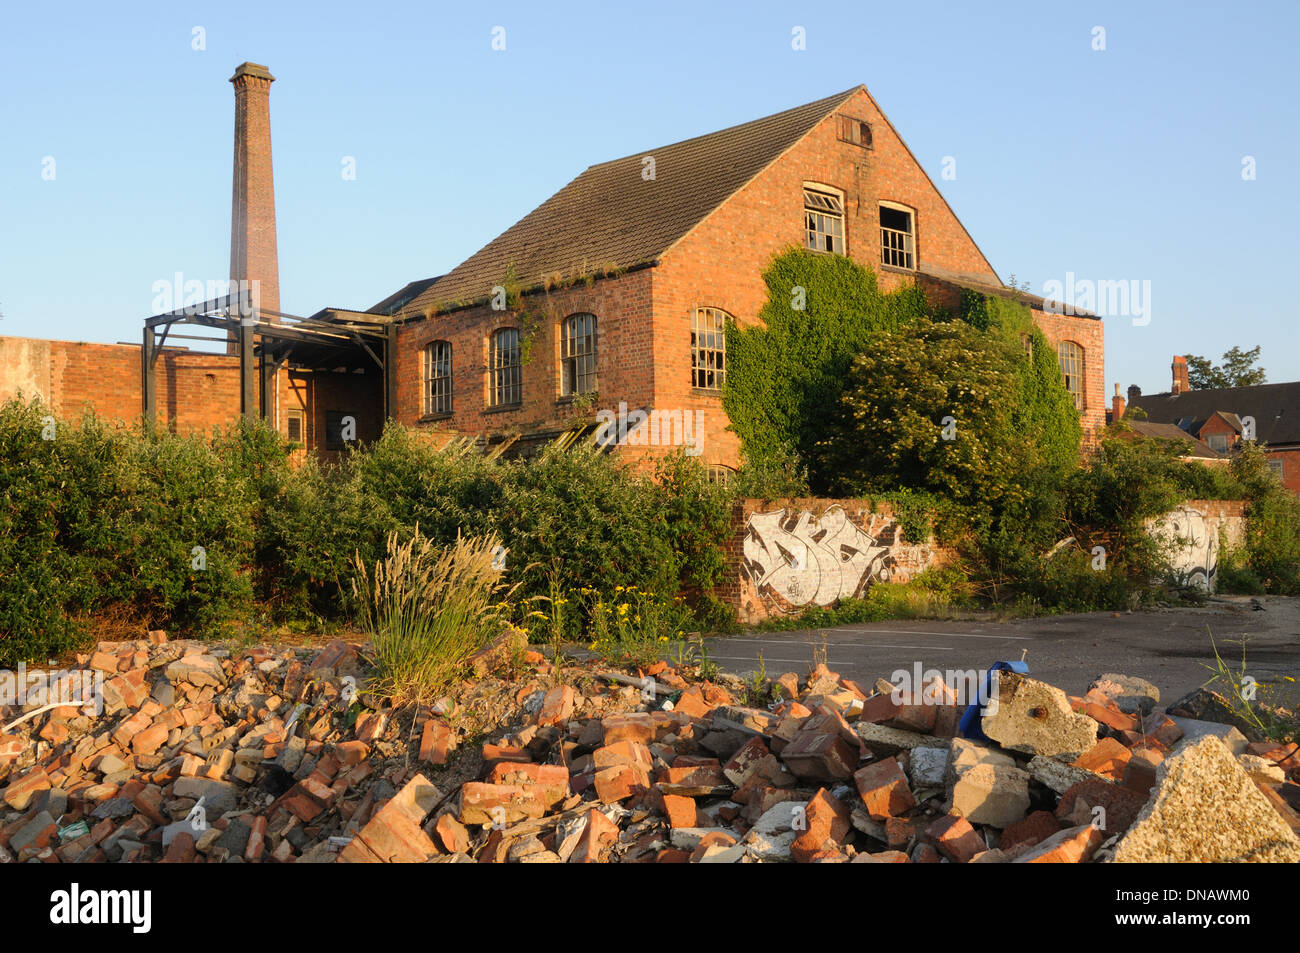 Demolished and dilapidated industrial buildings in Leicester, Leicestershire, England Stock Photo